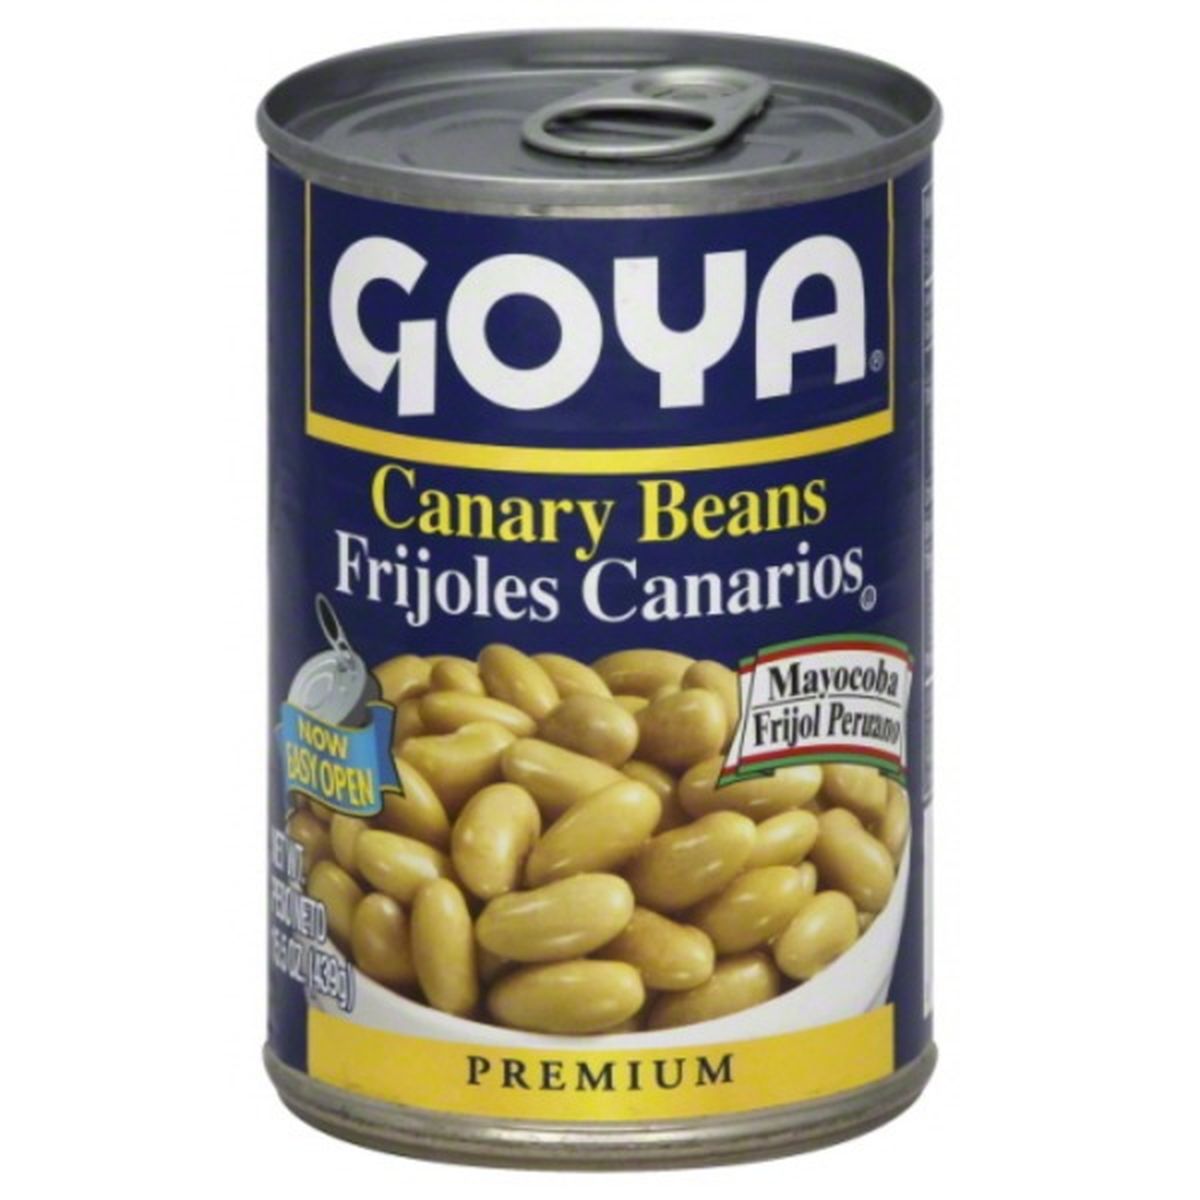 Calories in Goya Premium Canary Beans